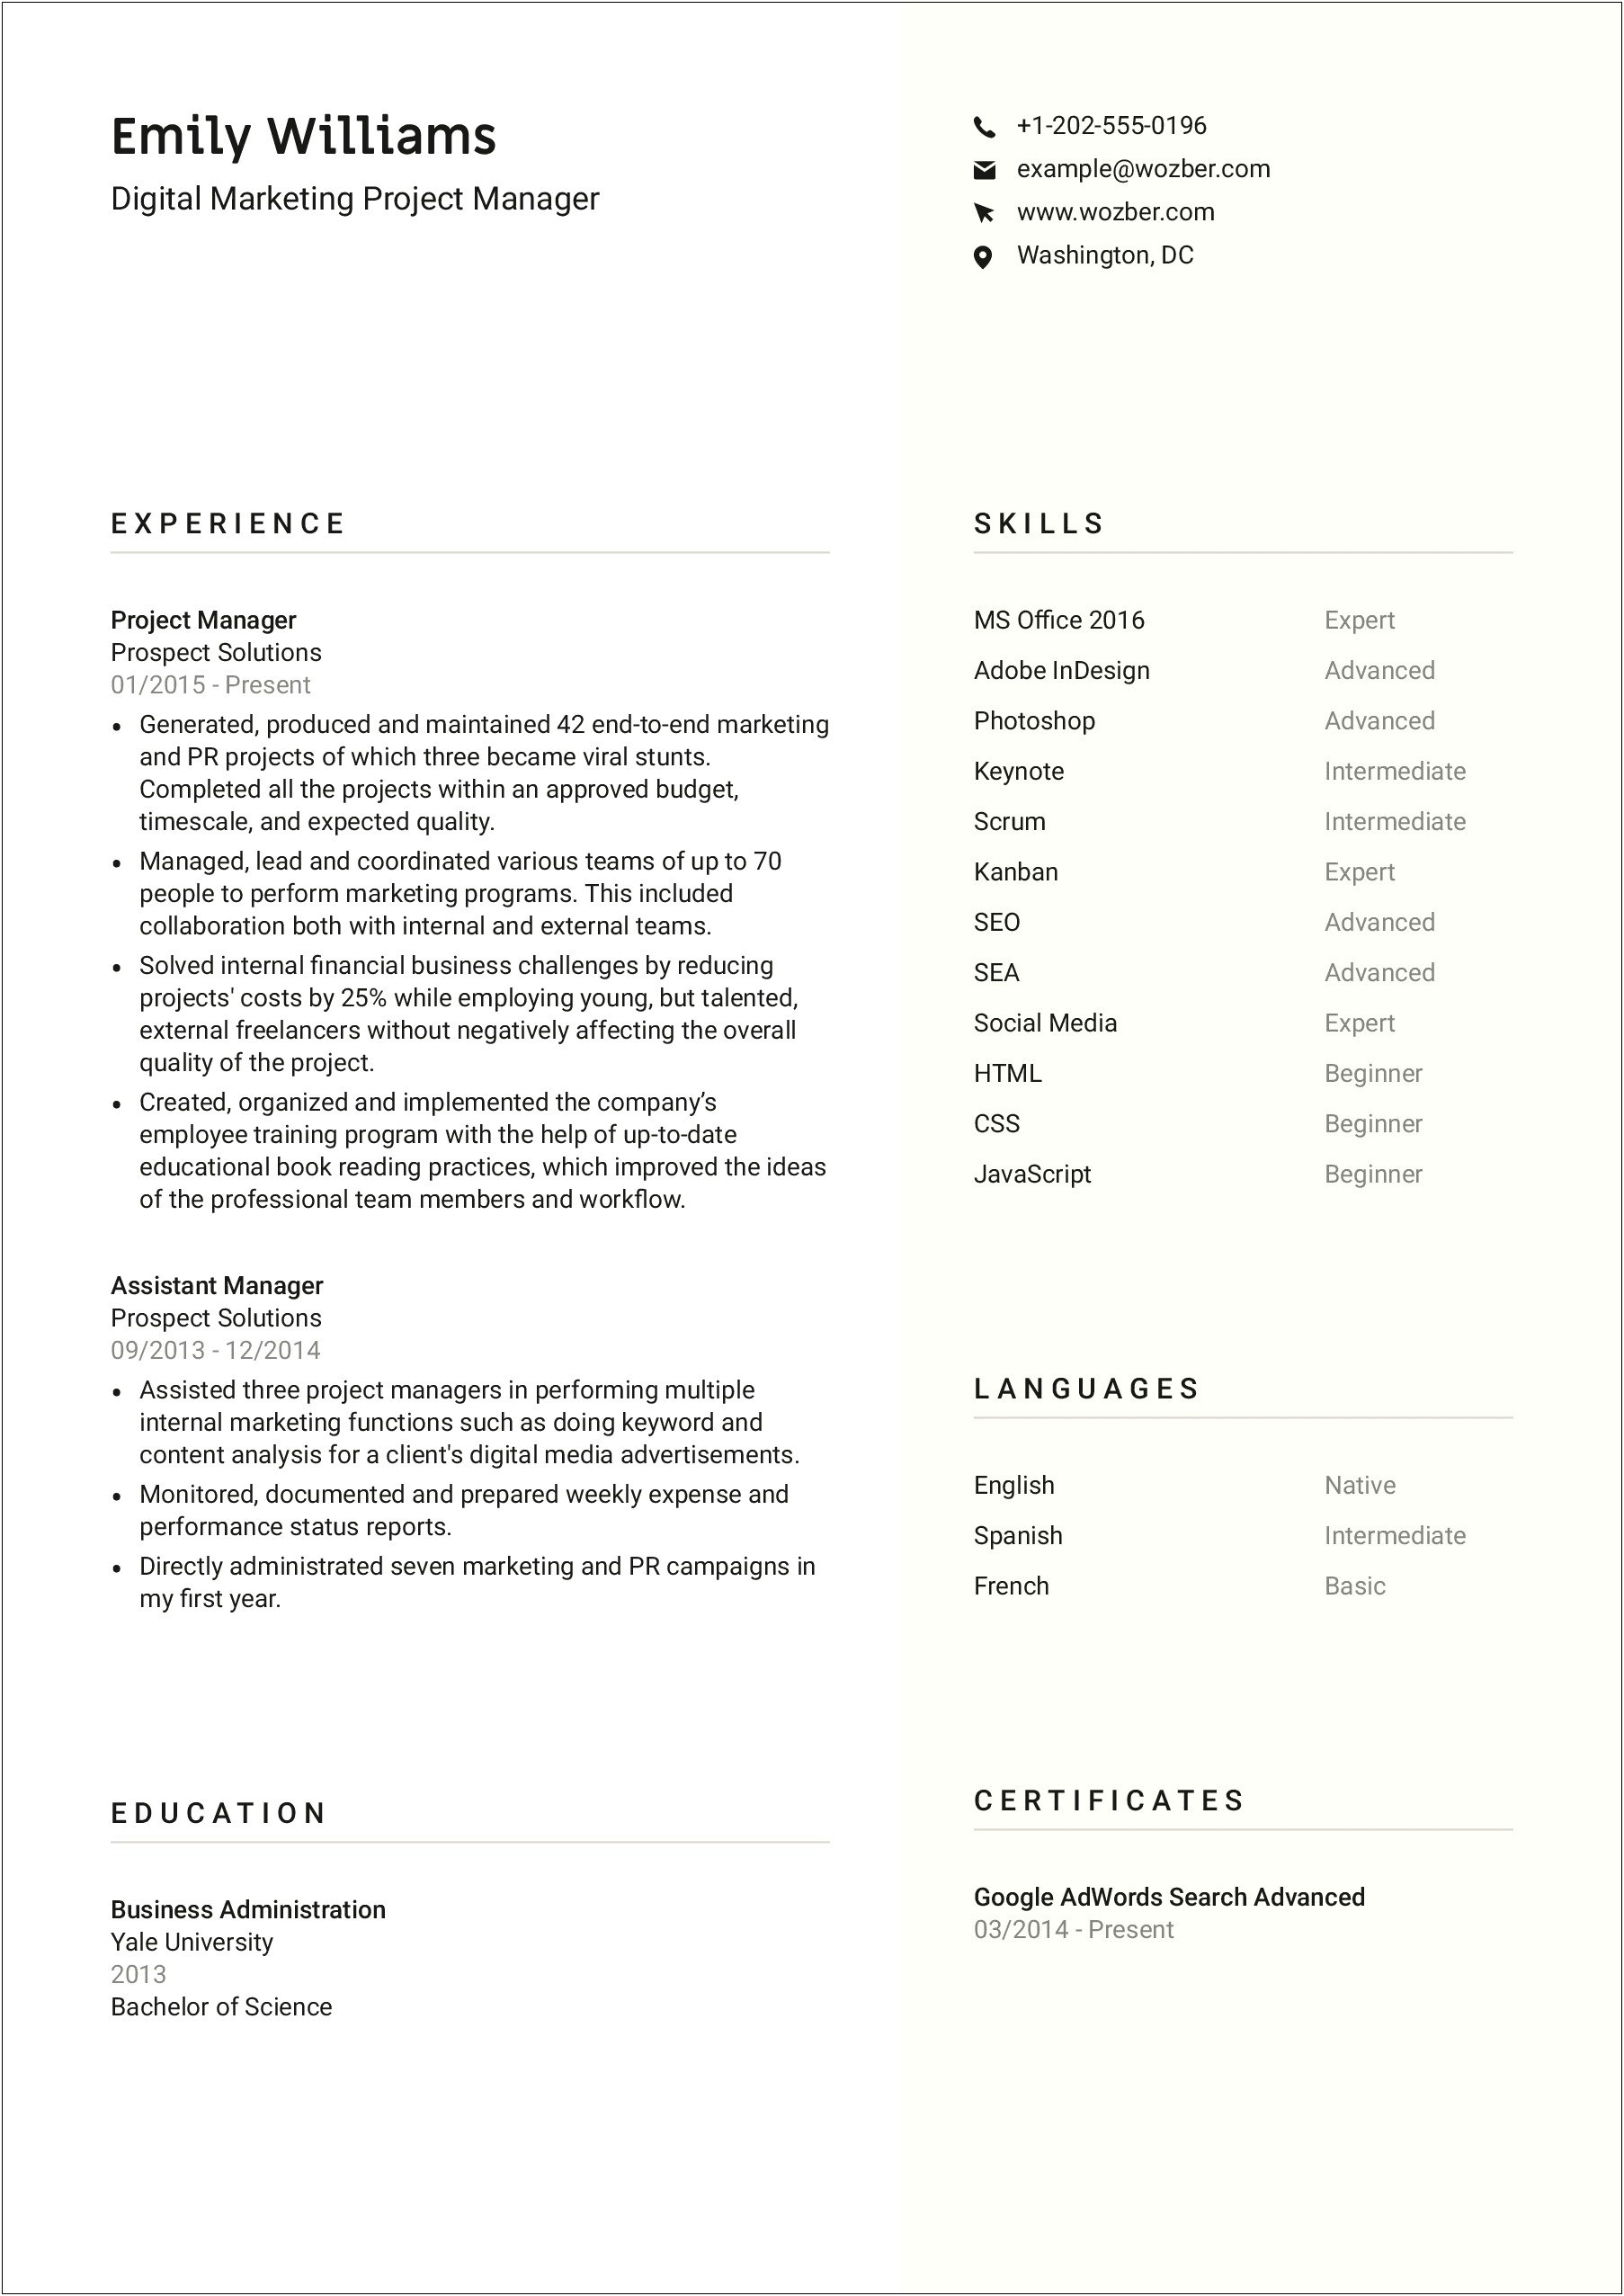 Sample Resume For Account Manager Position